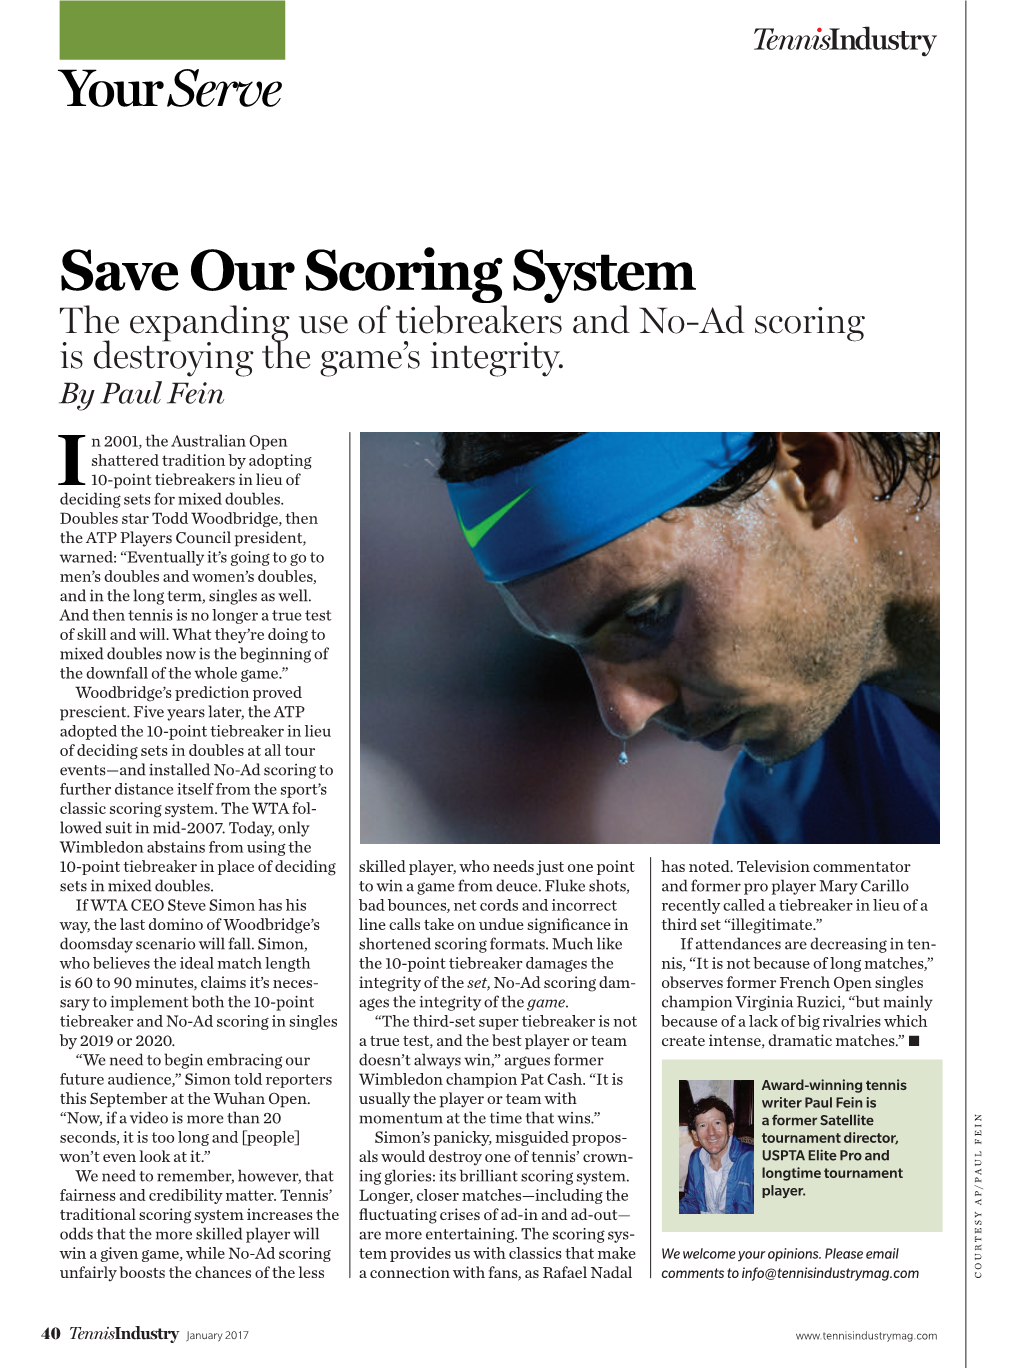 Save Our Scoring System the Expanding Use of Tiebreakers and No-Ad Scoring Is Destroying the Game’S Integrity